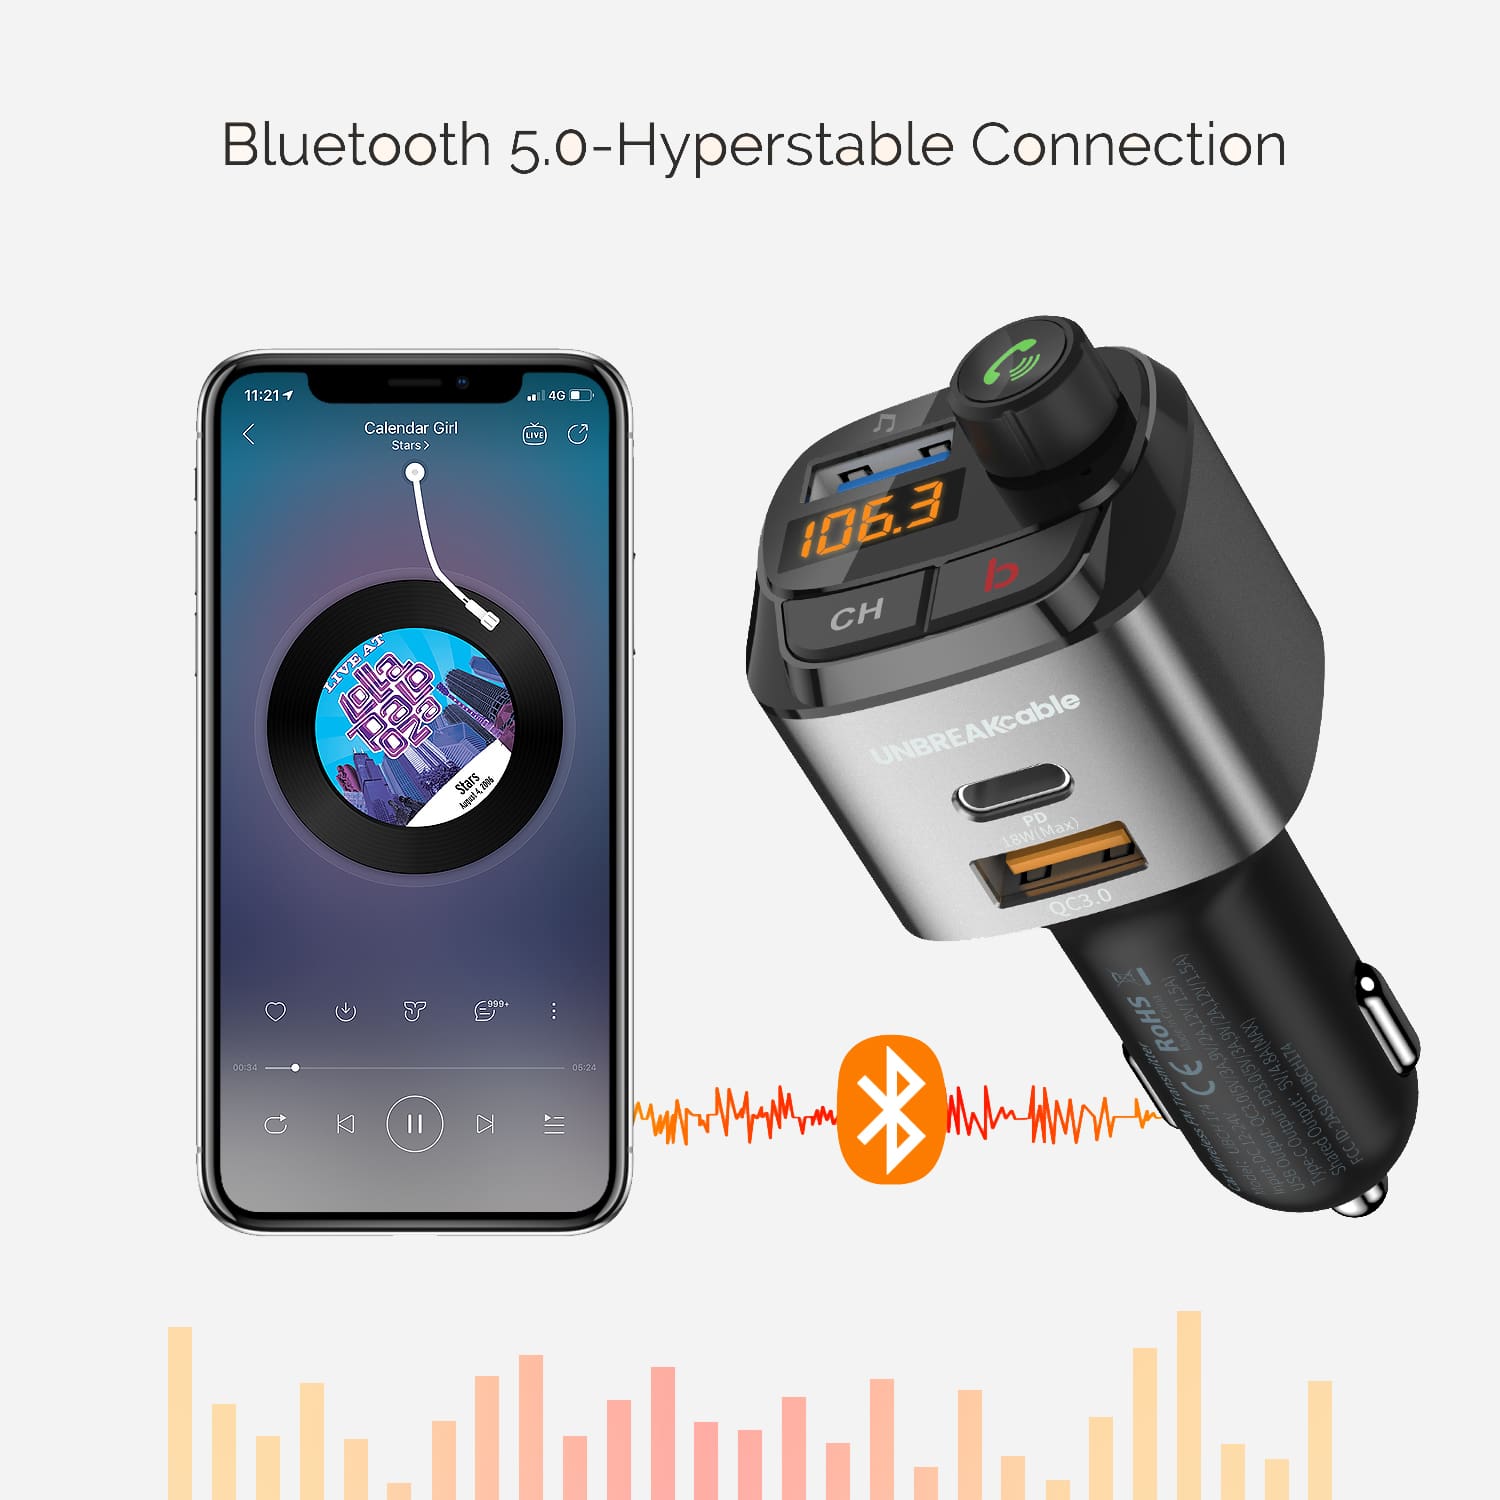 FM Transmitter Bluetooth 5.0 voor in Auto - Carkit USB 3.0 Fast Charge 